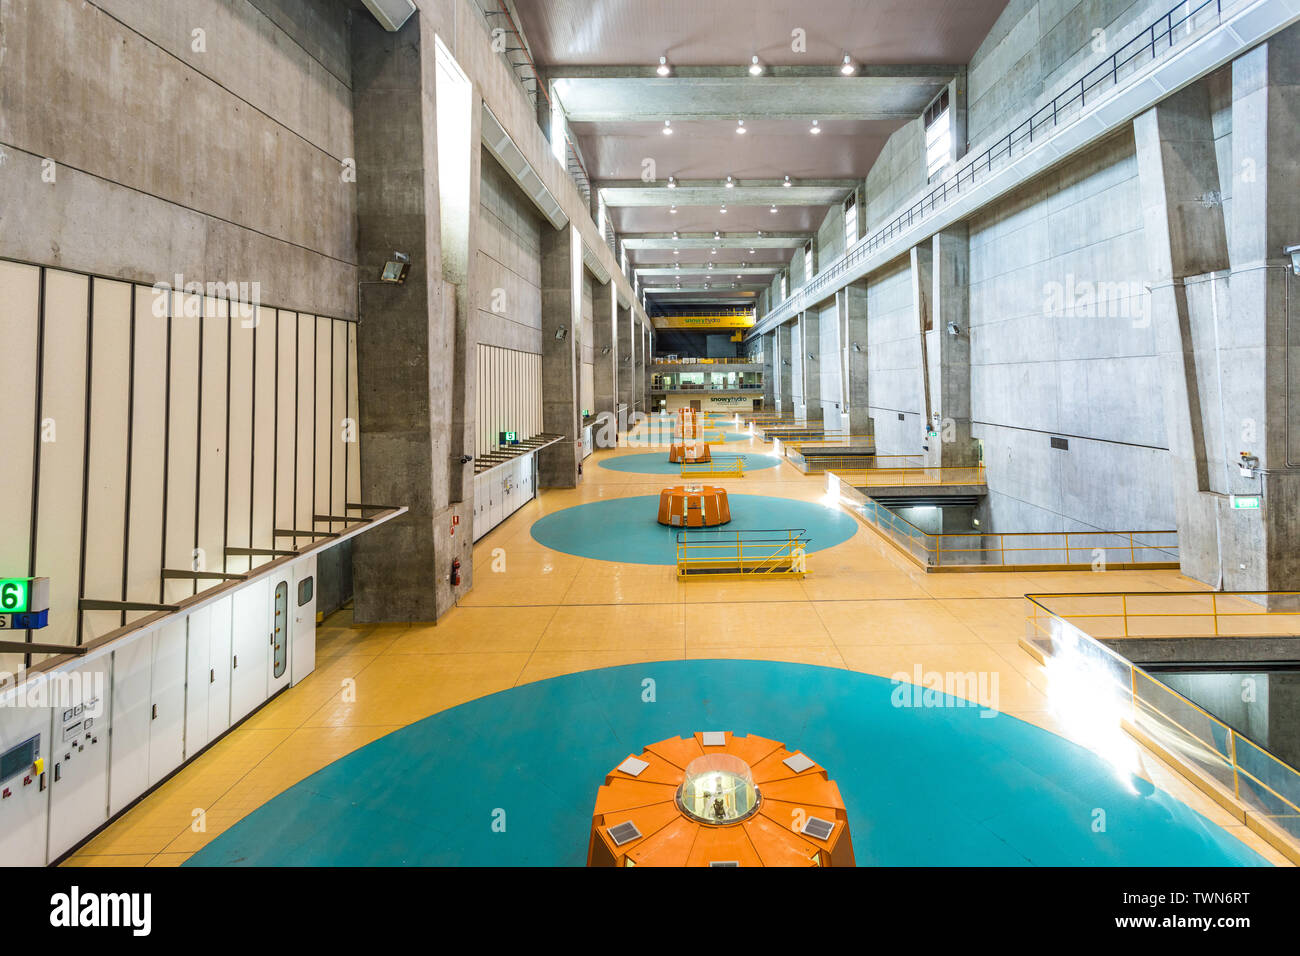 Tumut 3 Power station.  A hydro-electric power station in the Snowy Mountains, Australia.  Pic shows the turbine hall Stock Photo